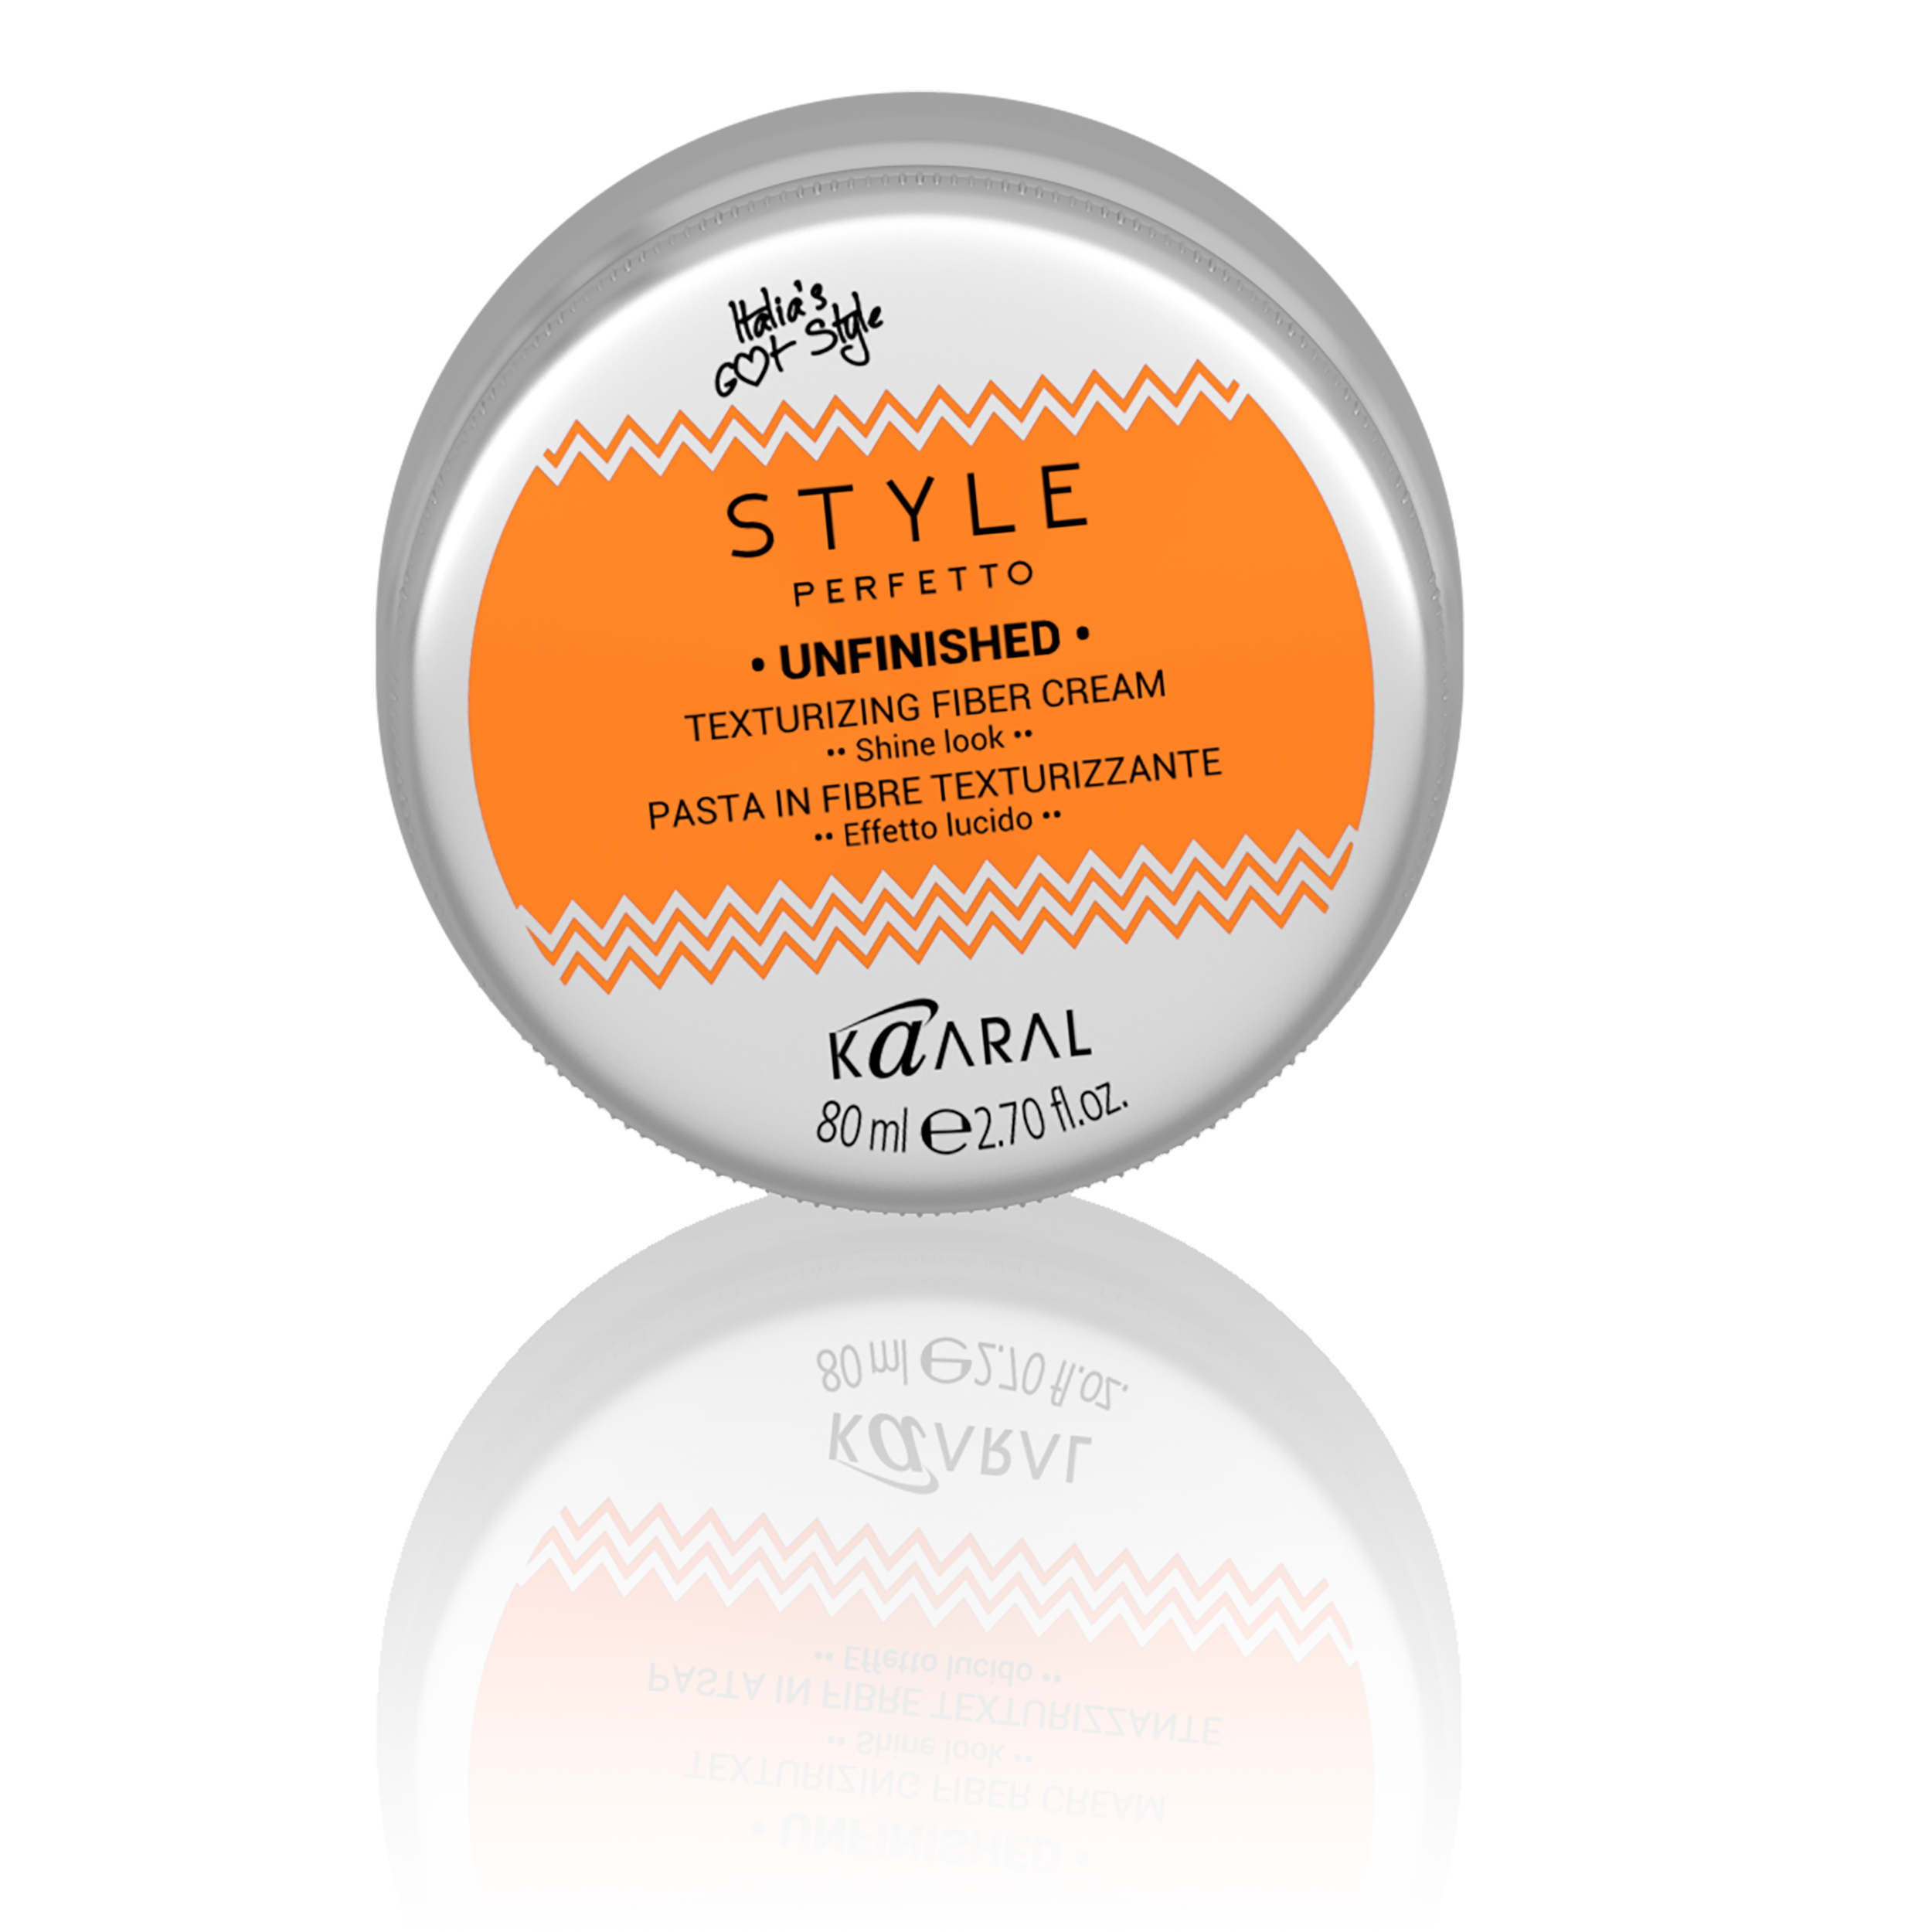 Kaaral - Style Perfetto Unfinished Texturizing Fiber Cream - Creata Beauty - Professional Beauty Products